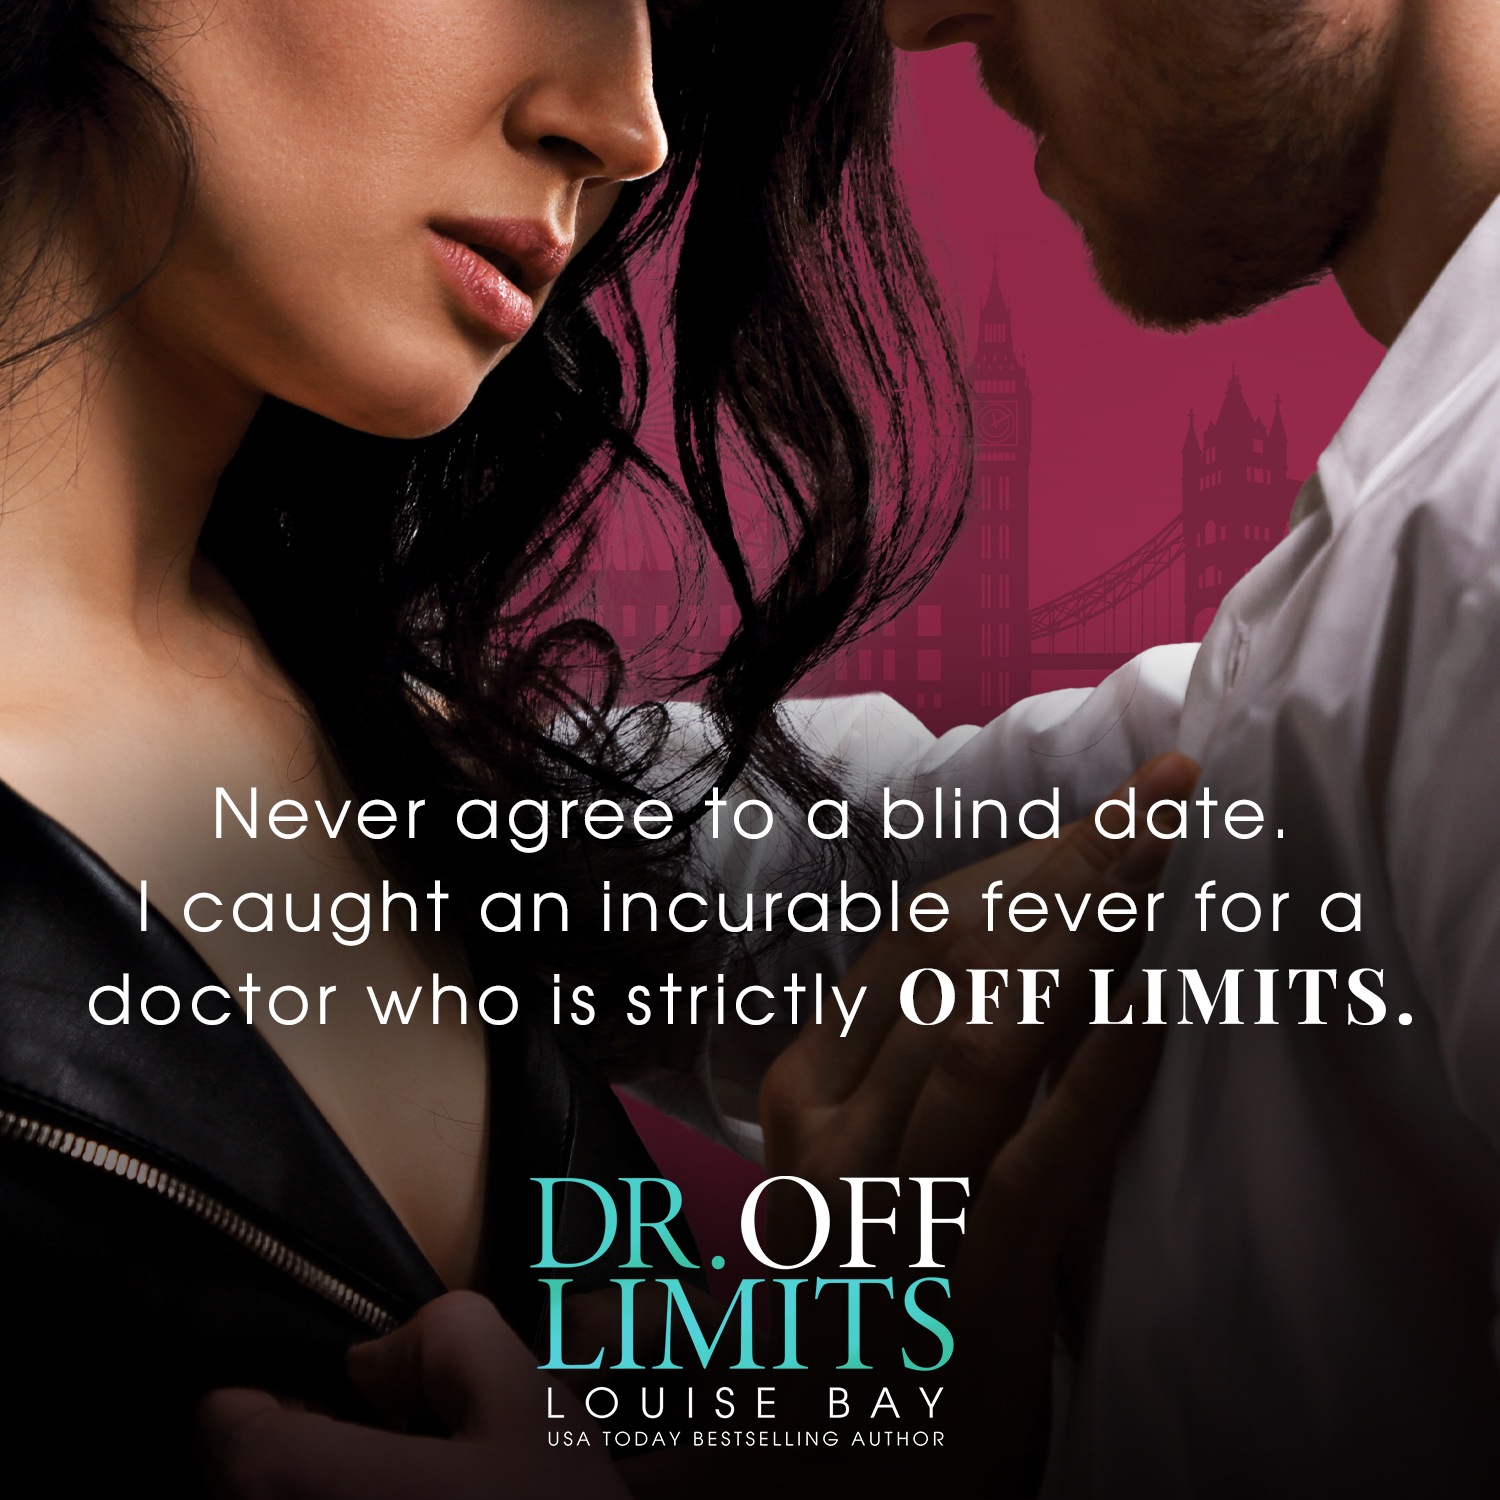 Dr. Off Limits (Doctors, #1) by Louise Bay